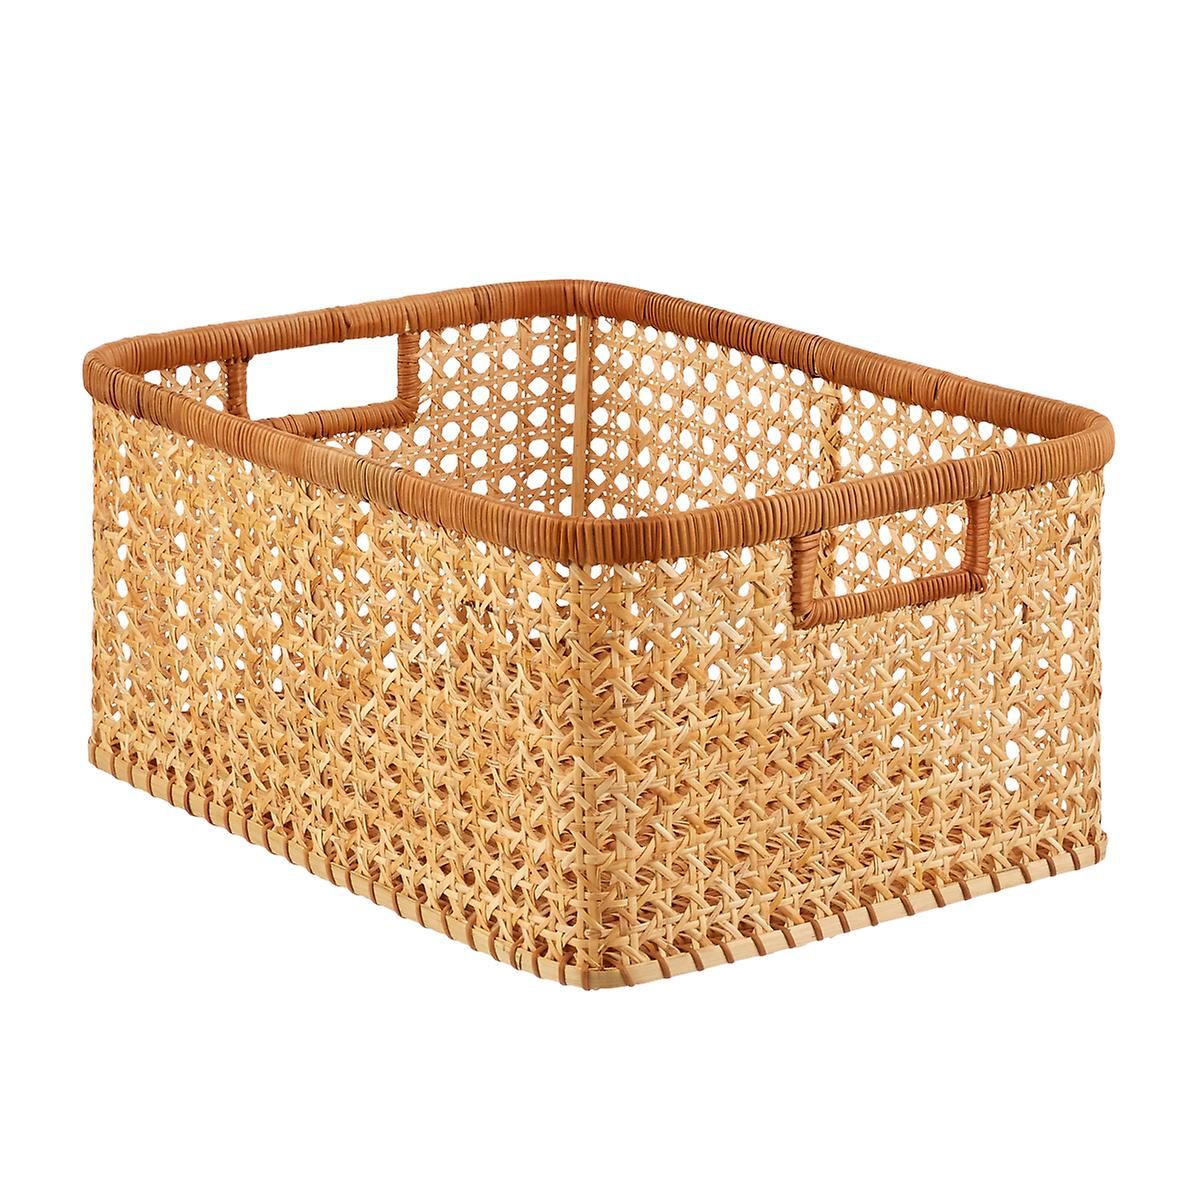 Large Albany Cane Rattan Bin Natural | The Container Store